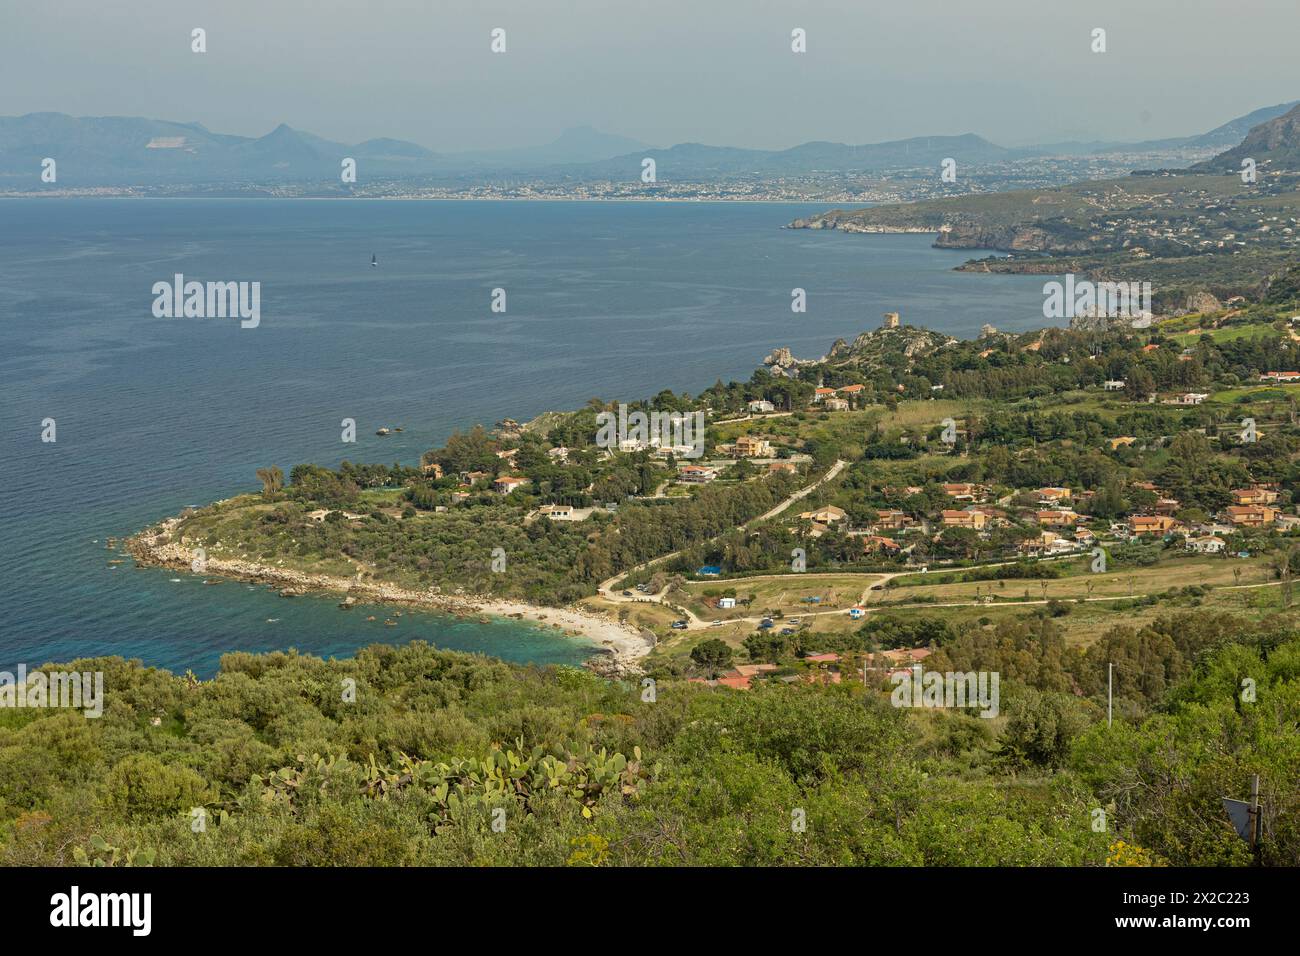 landscape in the Zingaro nature reserve in Sicily Stock Photo